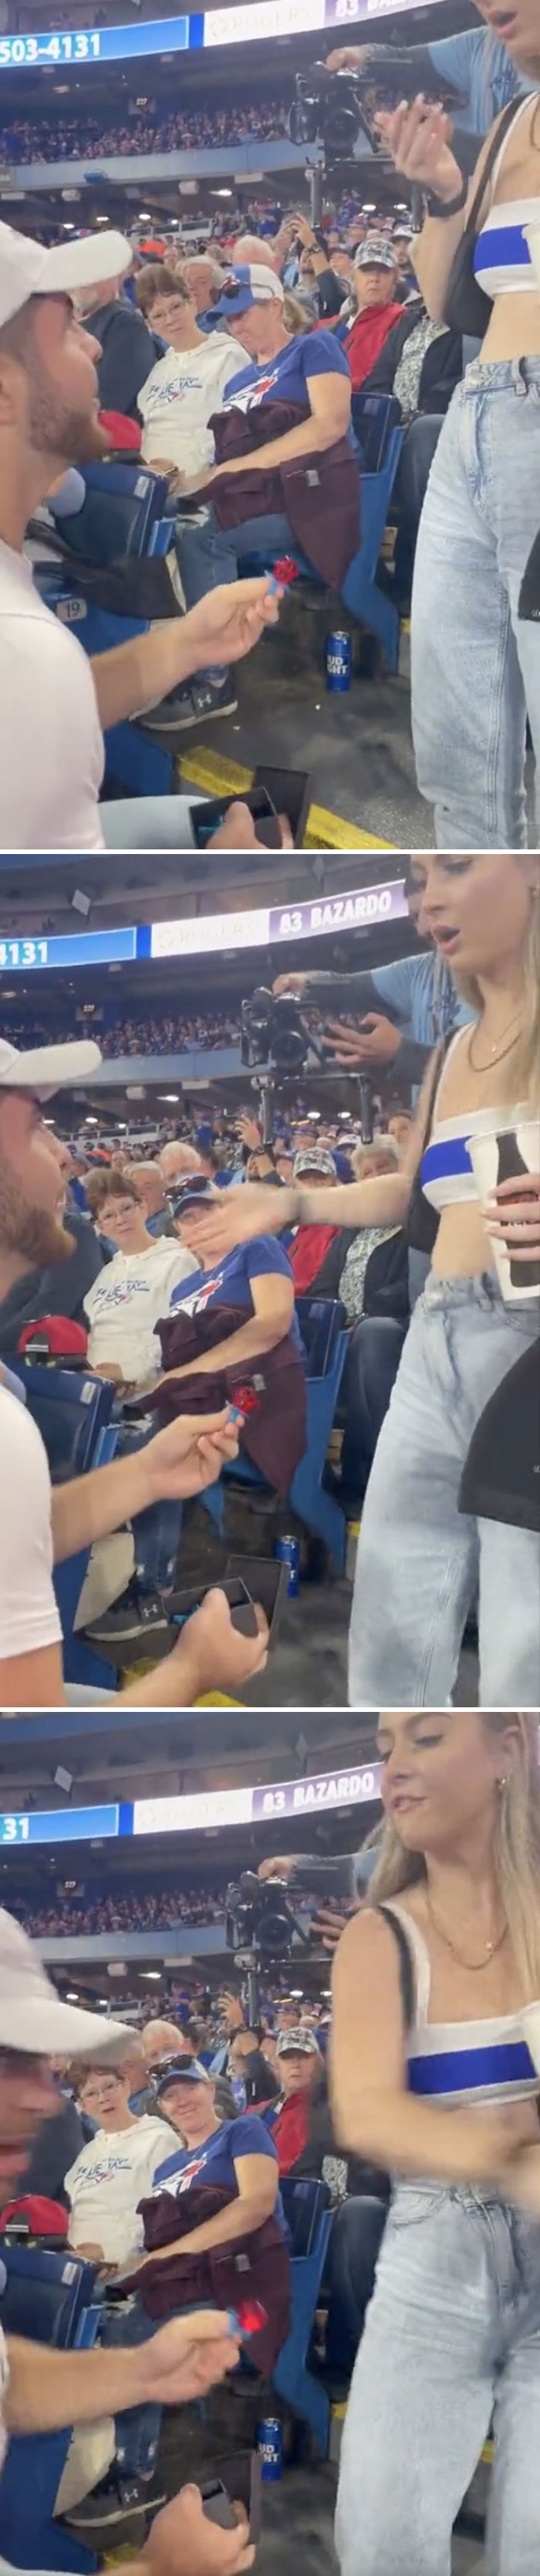 Man Slapped After Proposing With A Ring Pop At Baseball Game